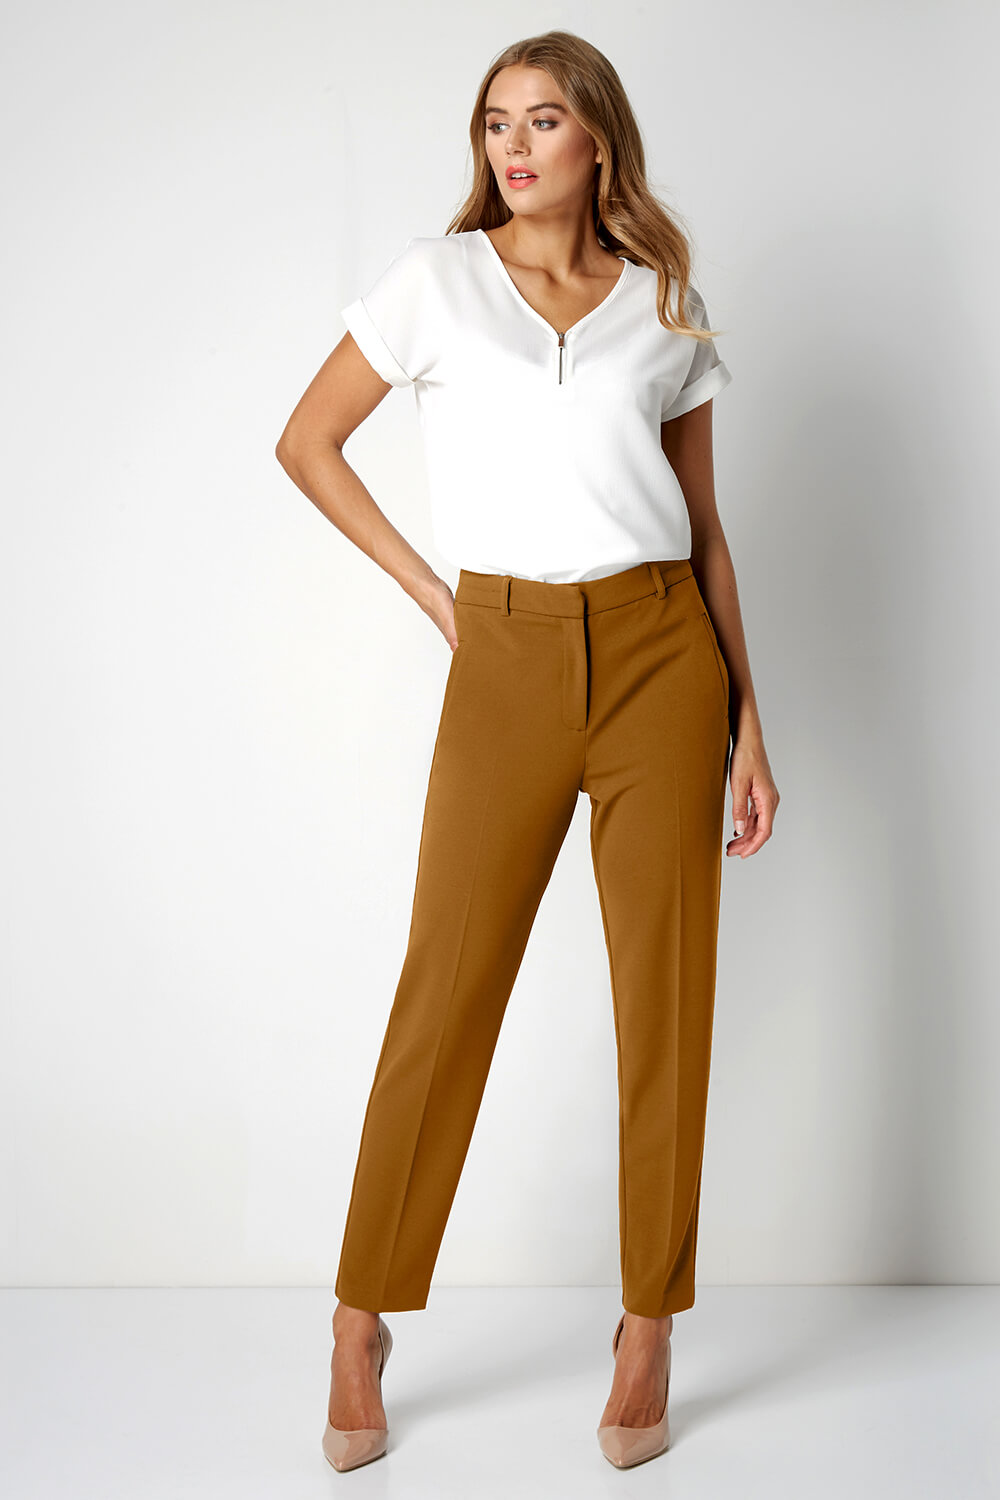 Buy FASHION CLOUD Cotton Strechable Trousers for Women Multiple Colors  Camel Brown at Amazonin